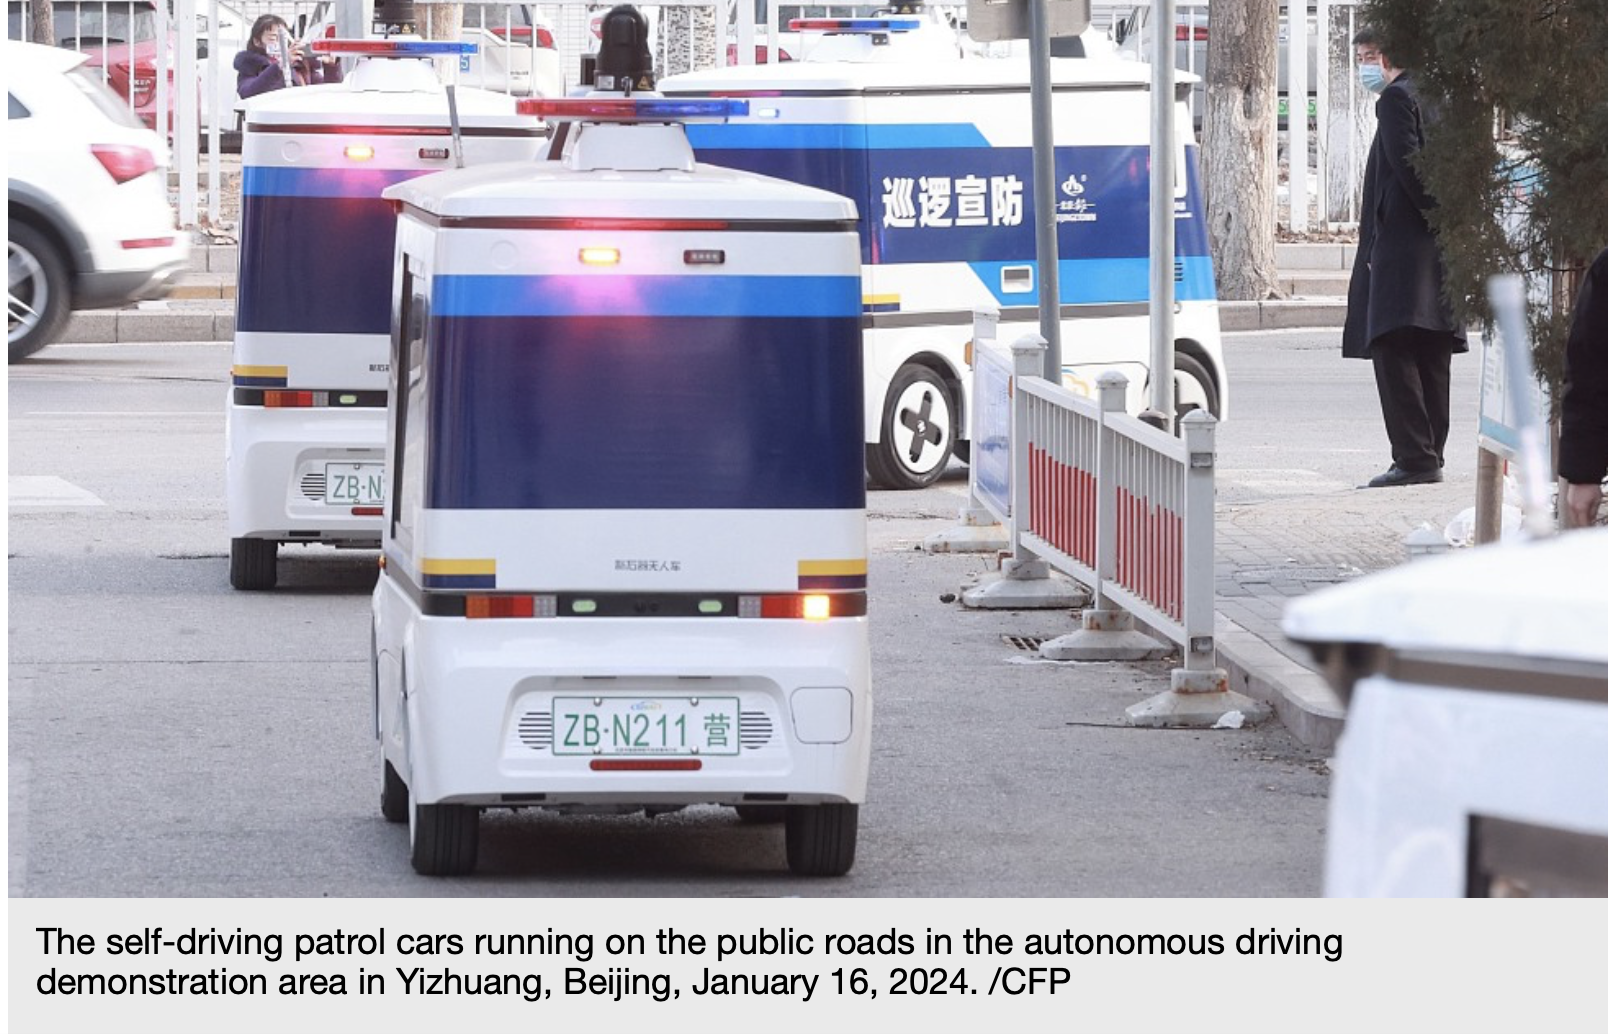 2024/01 Self-driving police patrol cars tested in Beijing demonstration zone